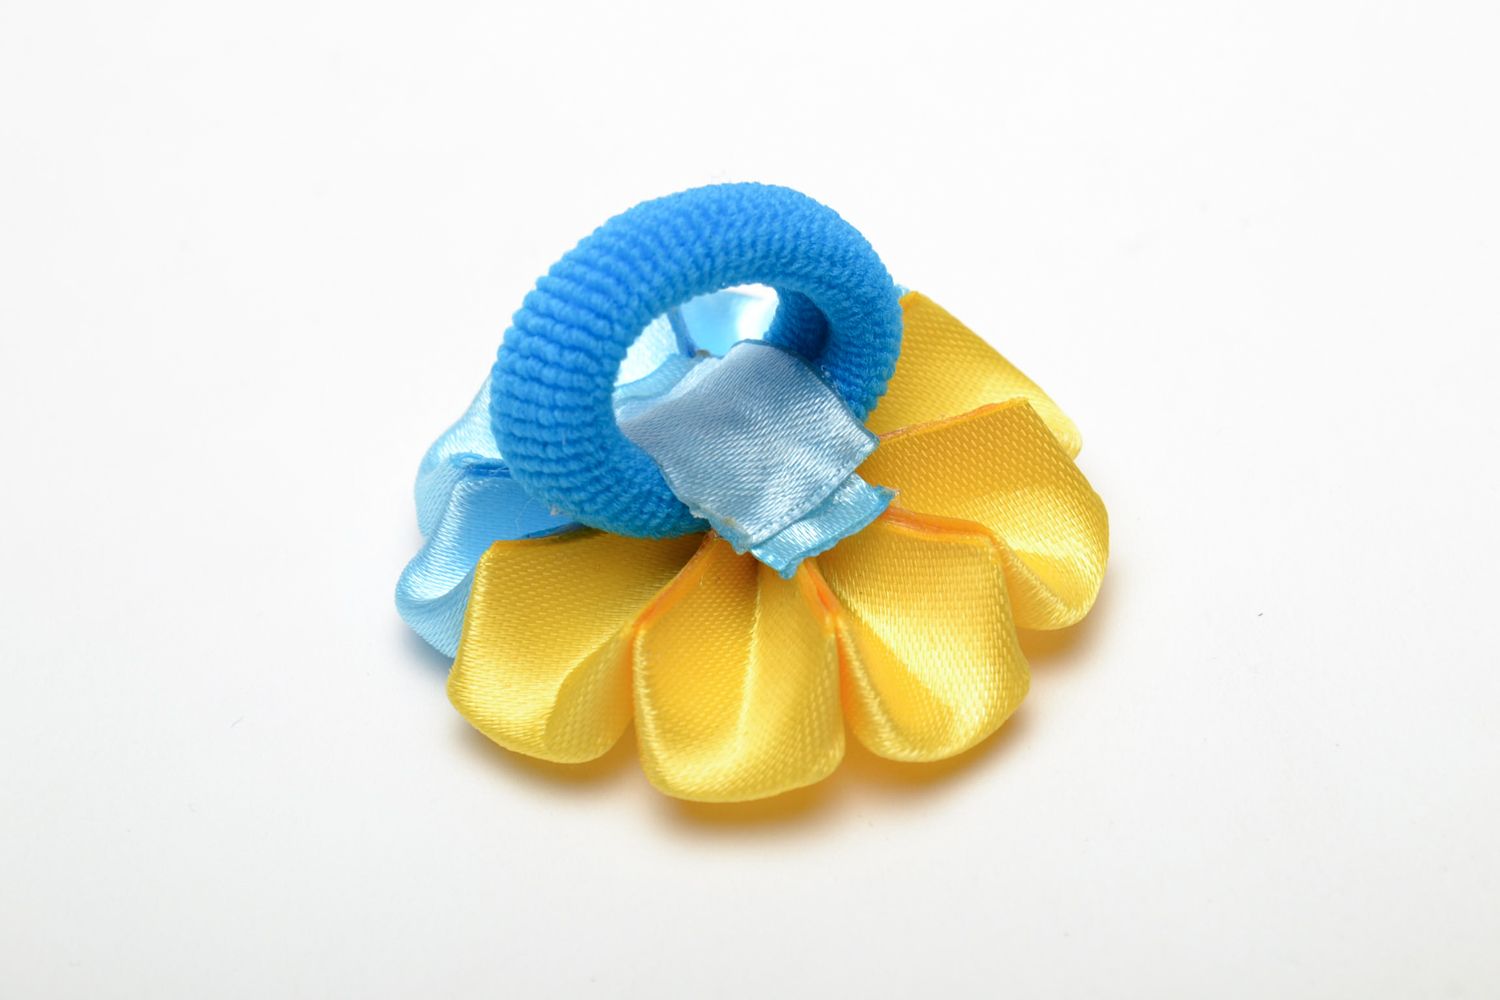 Yellow and blue kanzashi flower hair tie photo 4